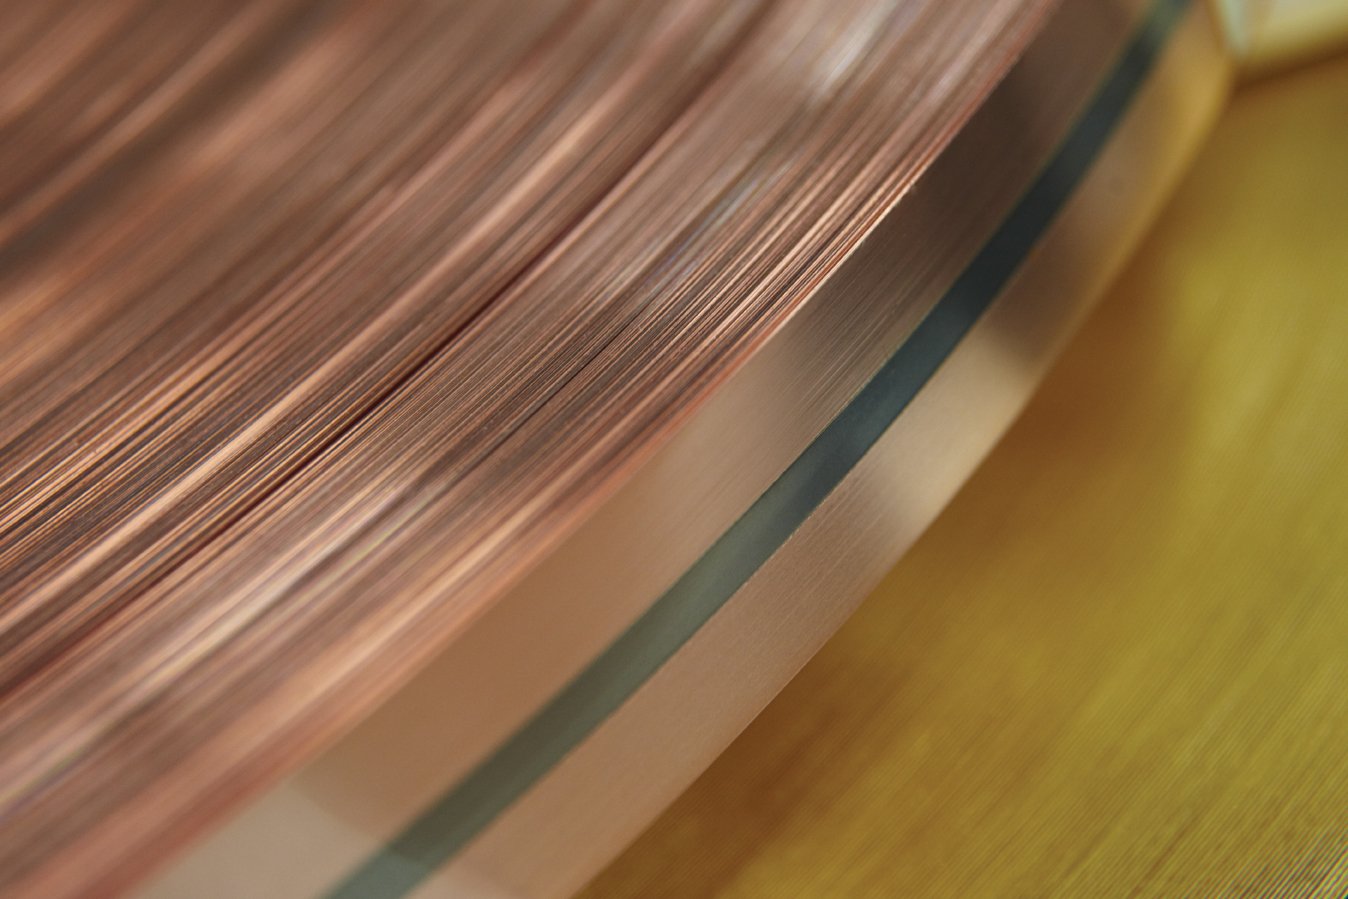 Copper strip clad with inlay